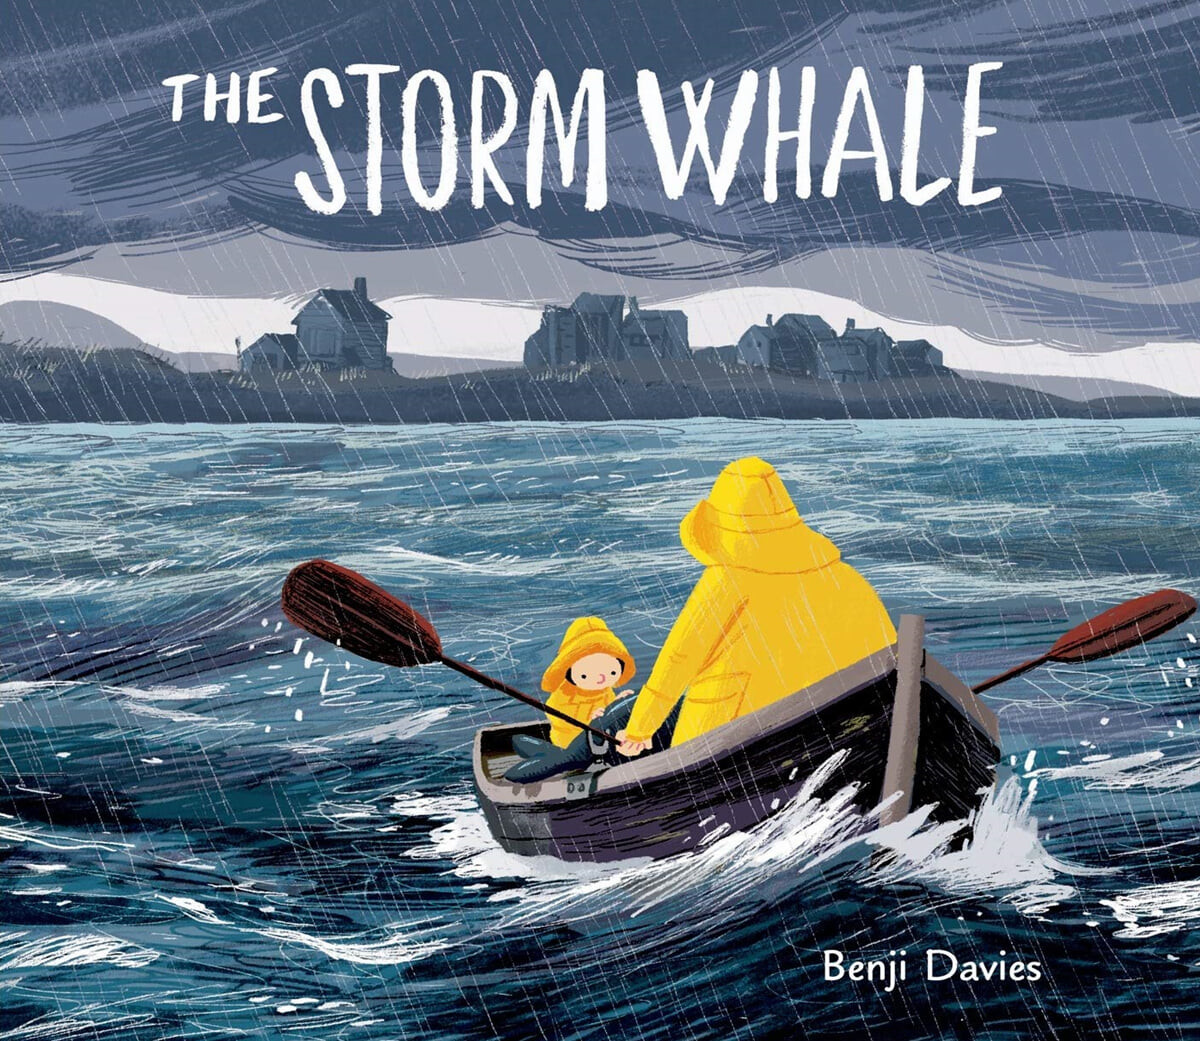 (The) storm whale